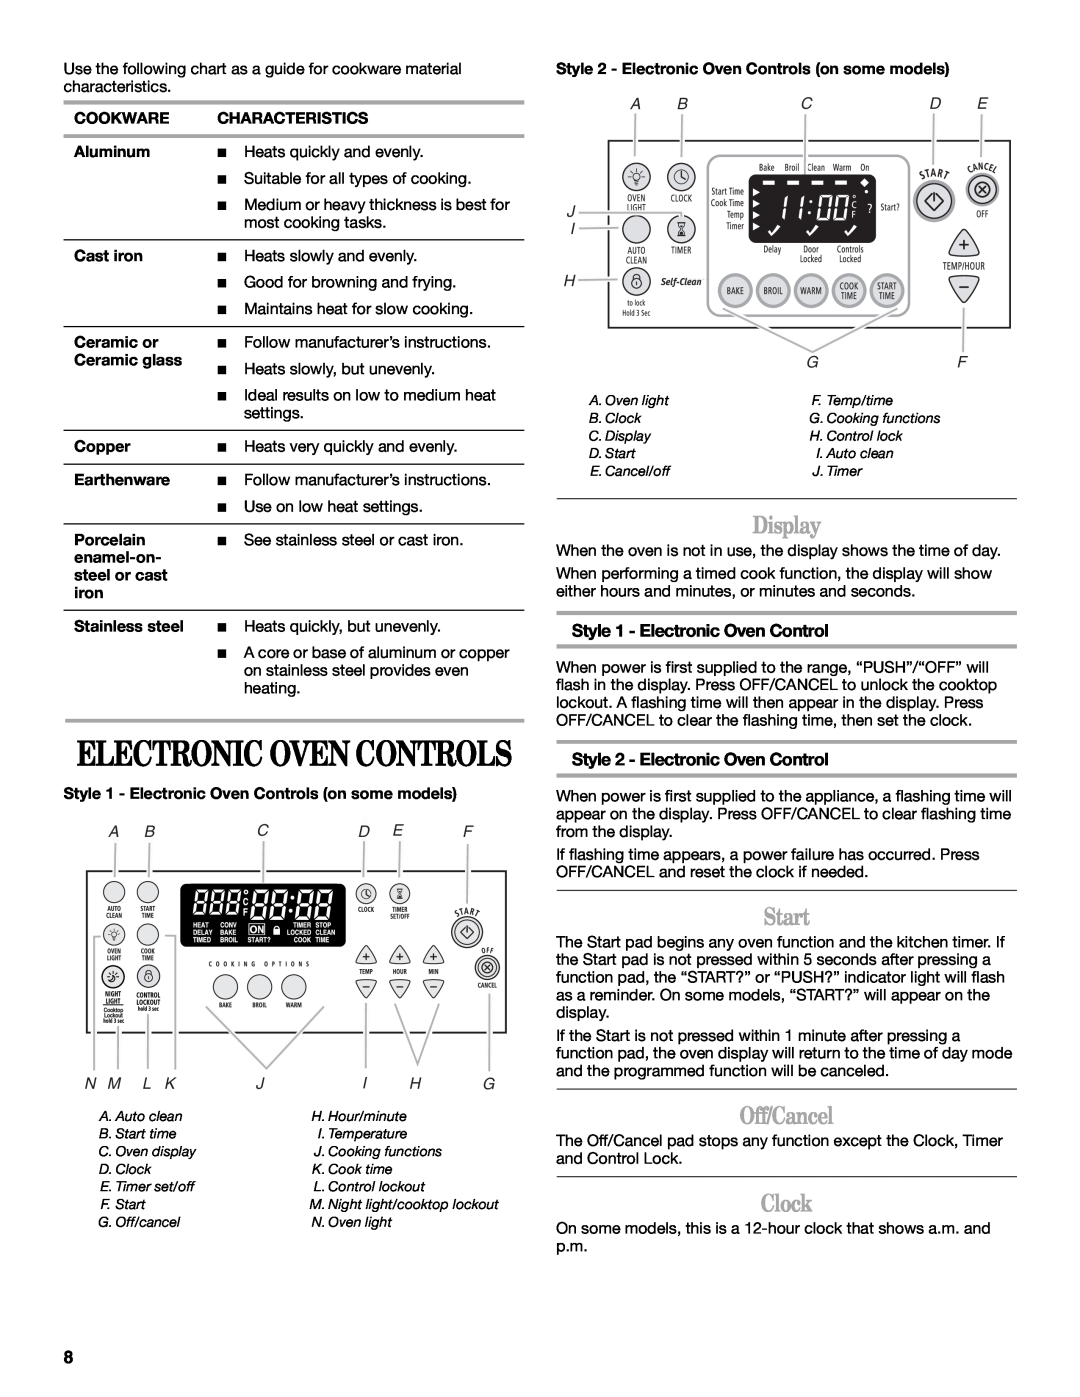 Whirlpool W10162212A manual Display, Start, Off/Cancel, Clock, Electronic Oven Controls, Style 1 - Electronic Oven Control 